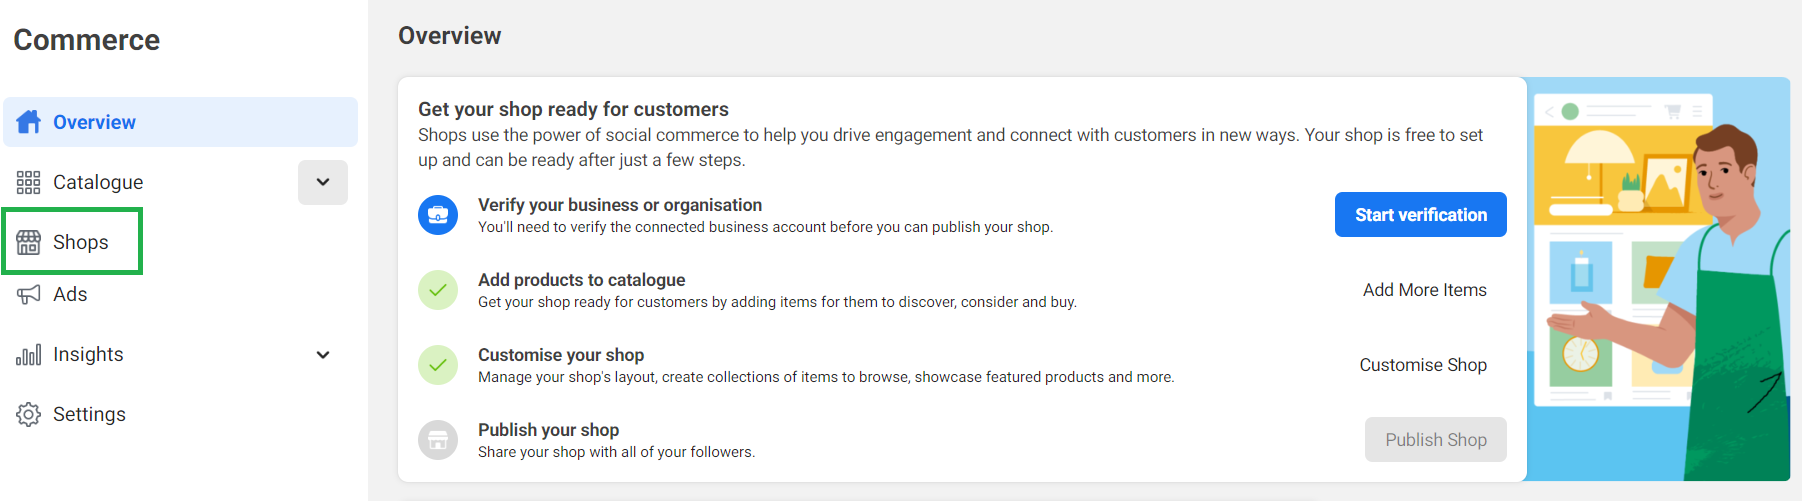 screenshot showing how to customise shops in Meta Commerce Manager